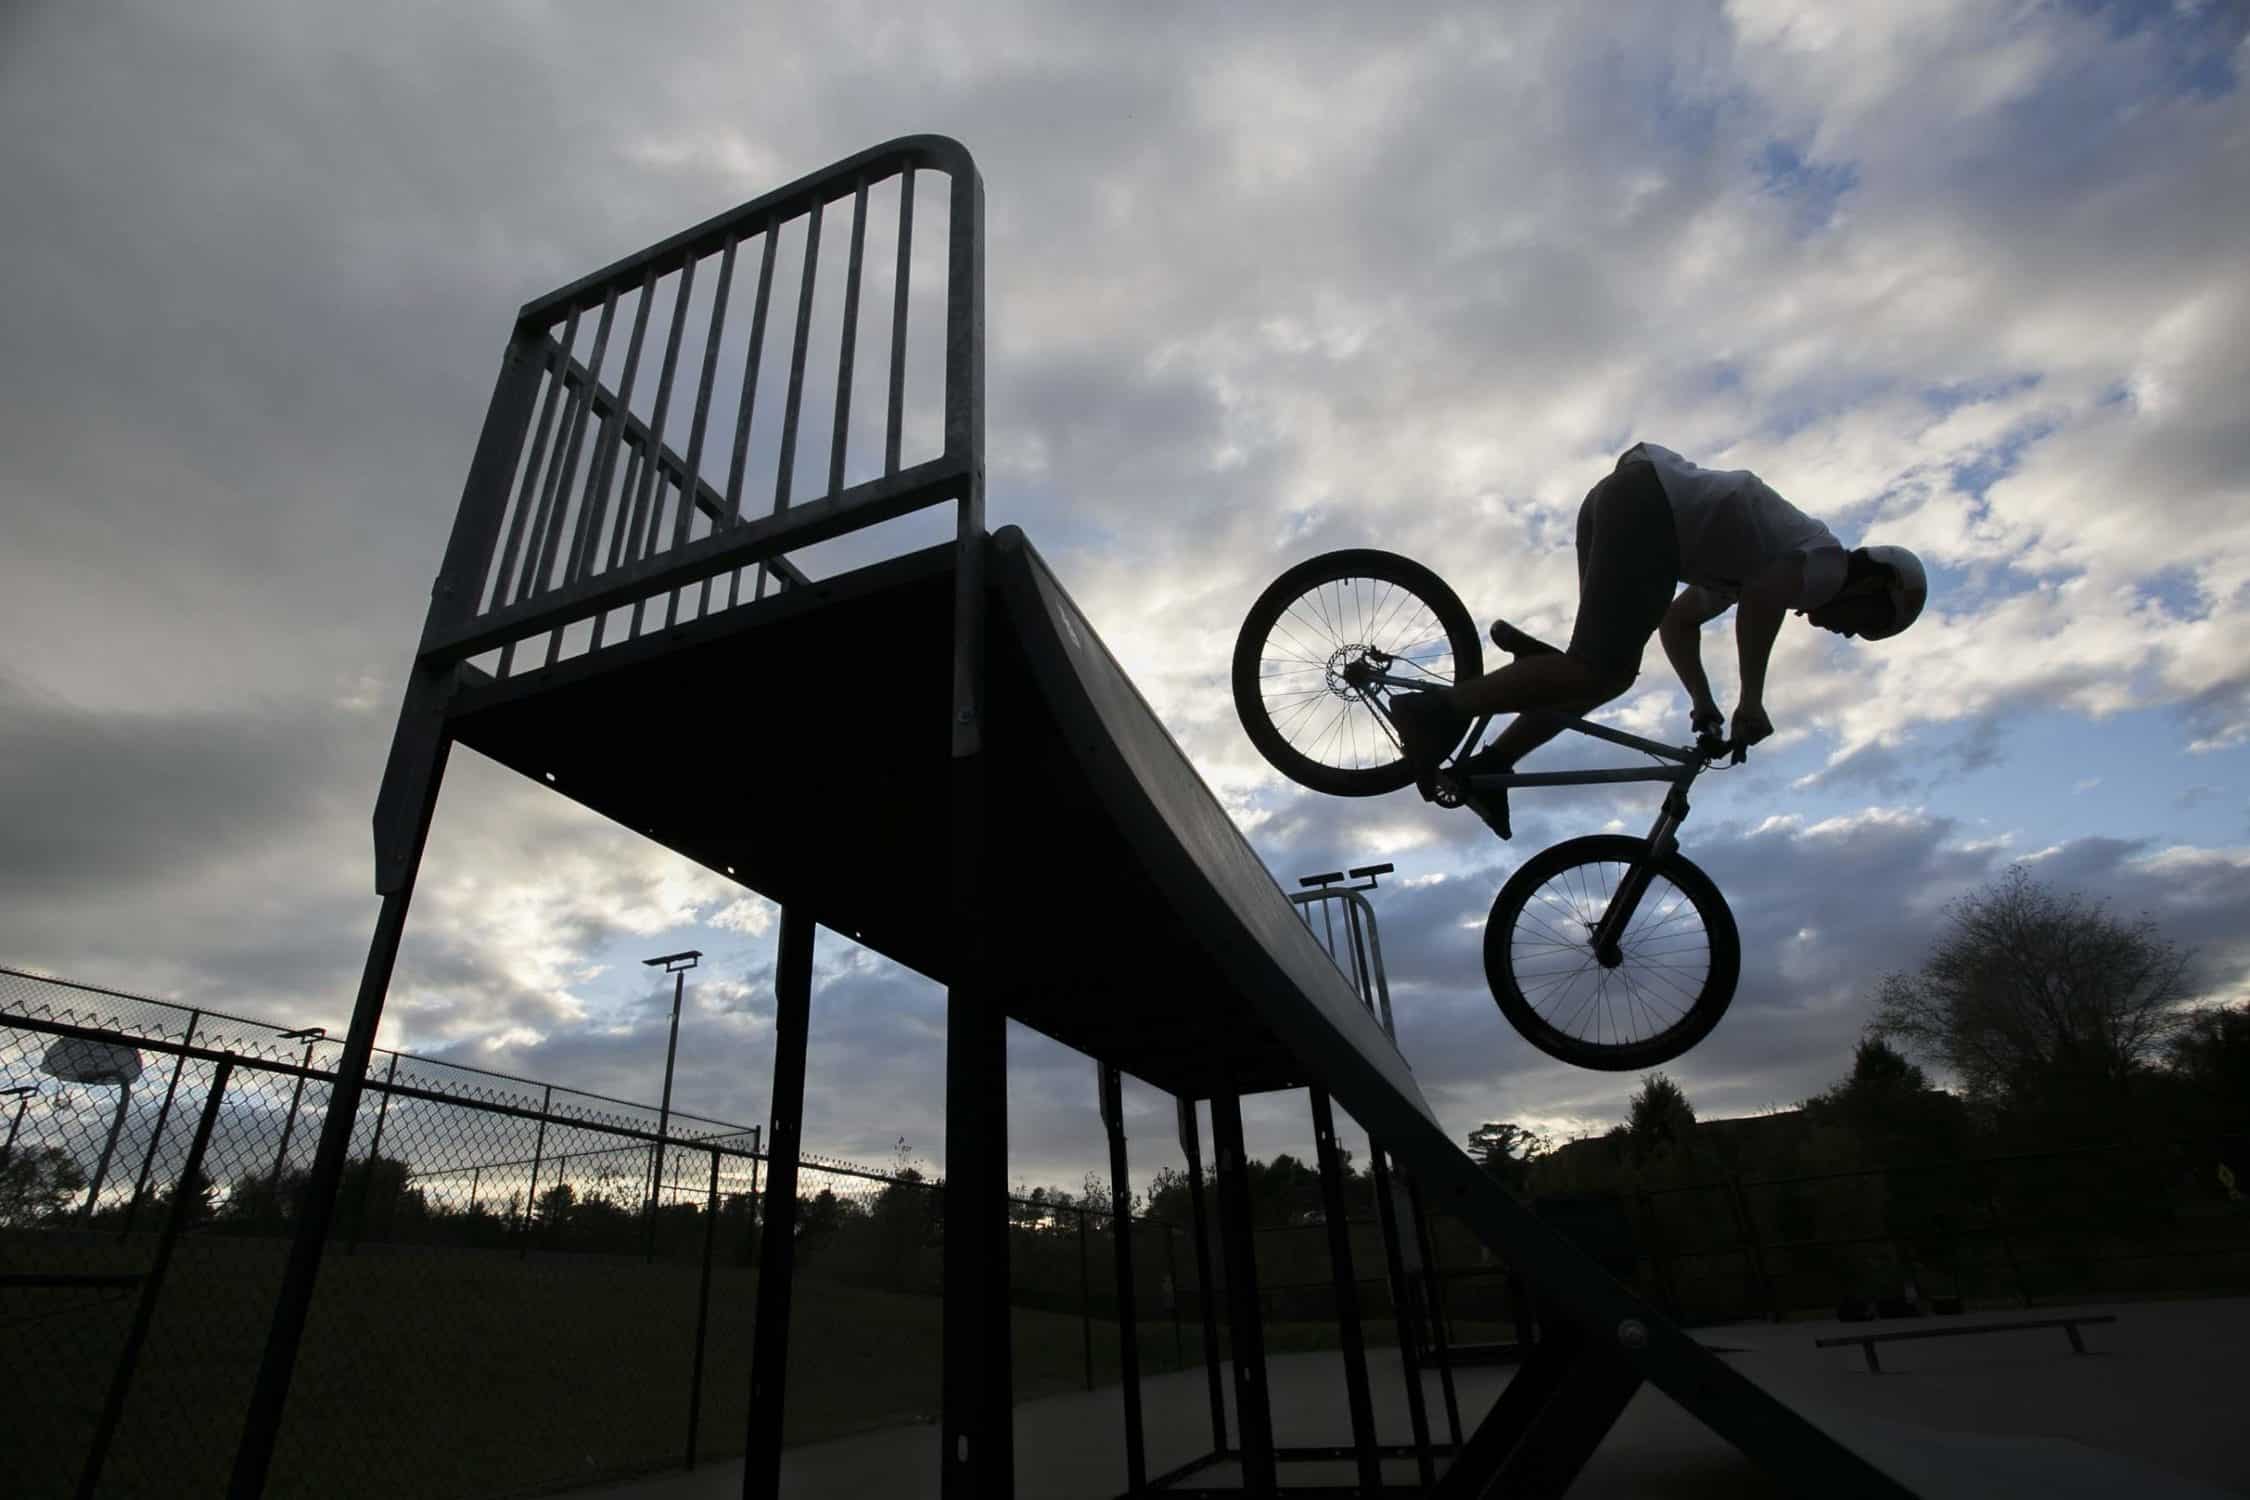 Student rides his bike on a ramp at the skate park